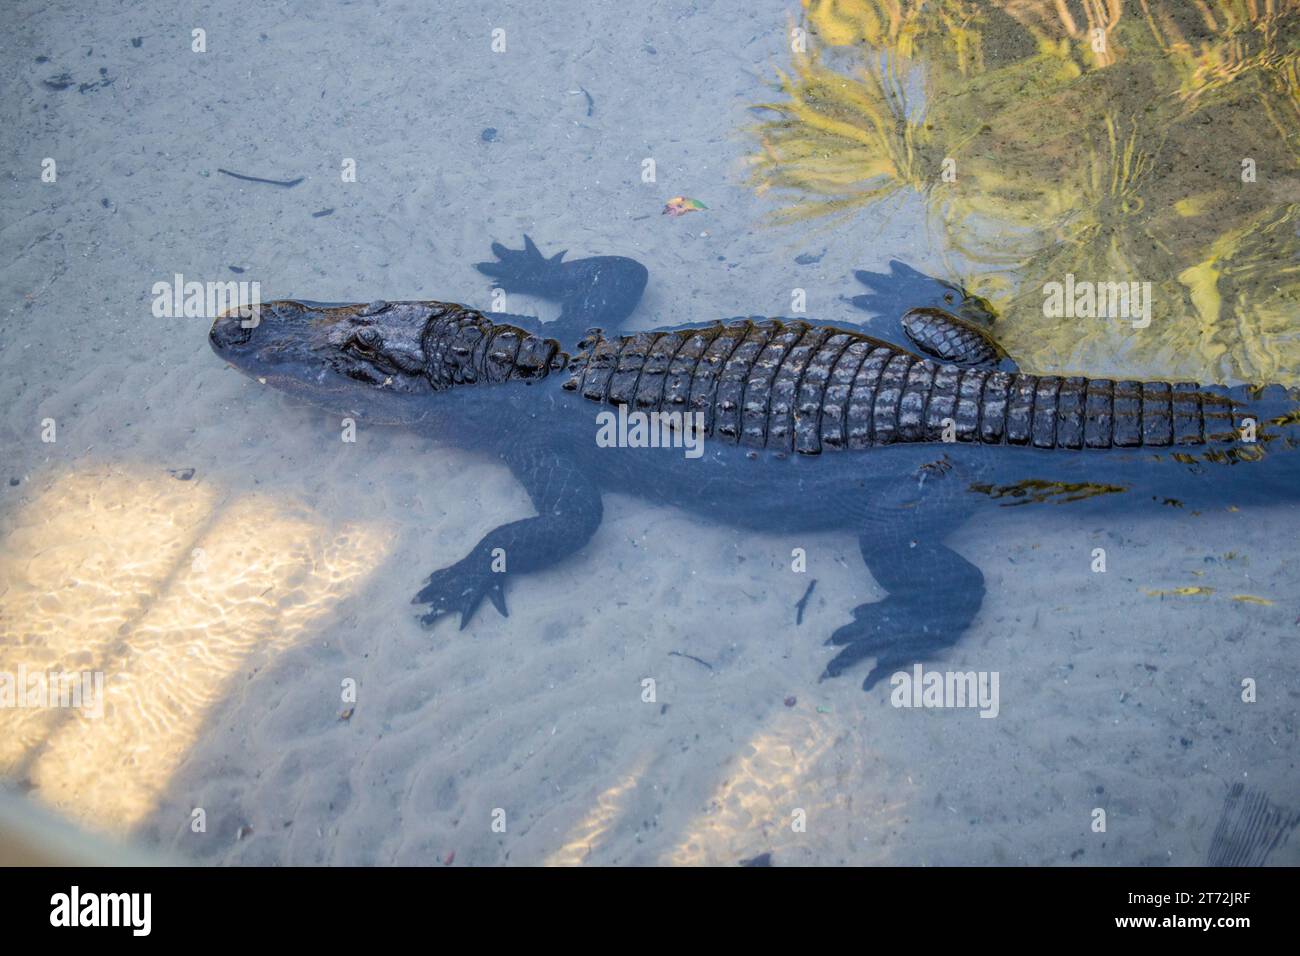 Alligator in water with sandy bottom Stock Photo